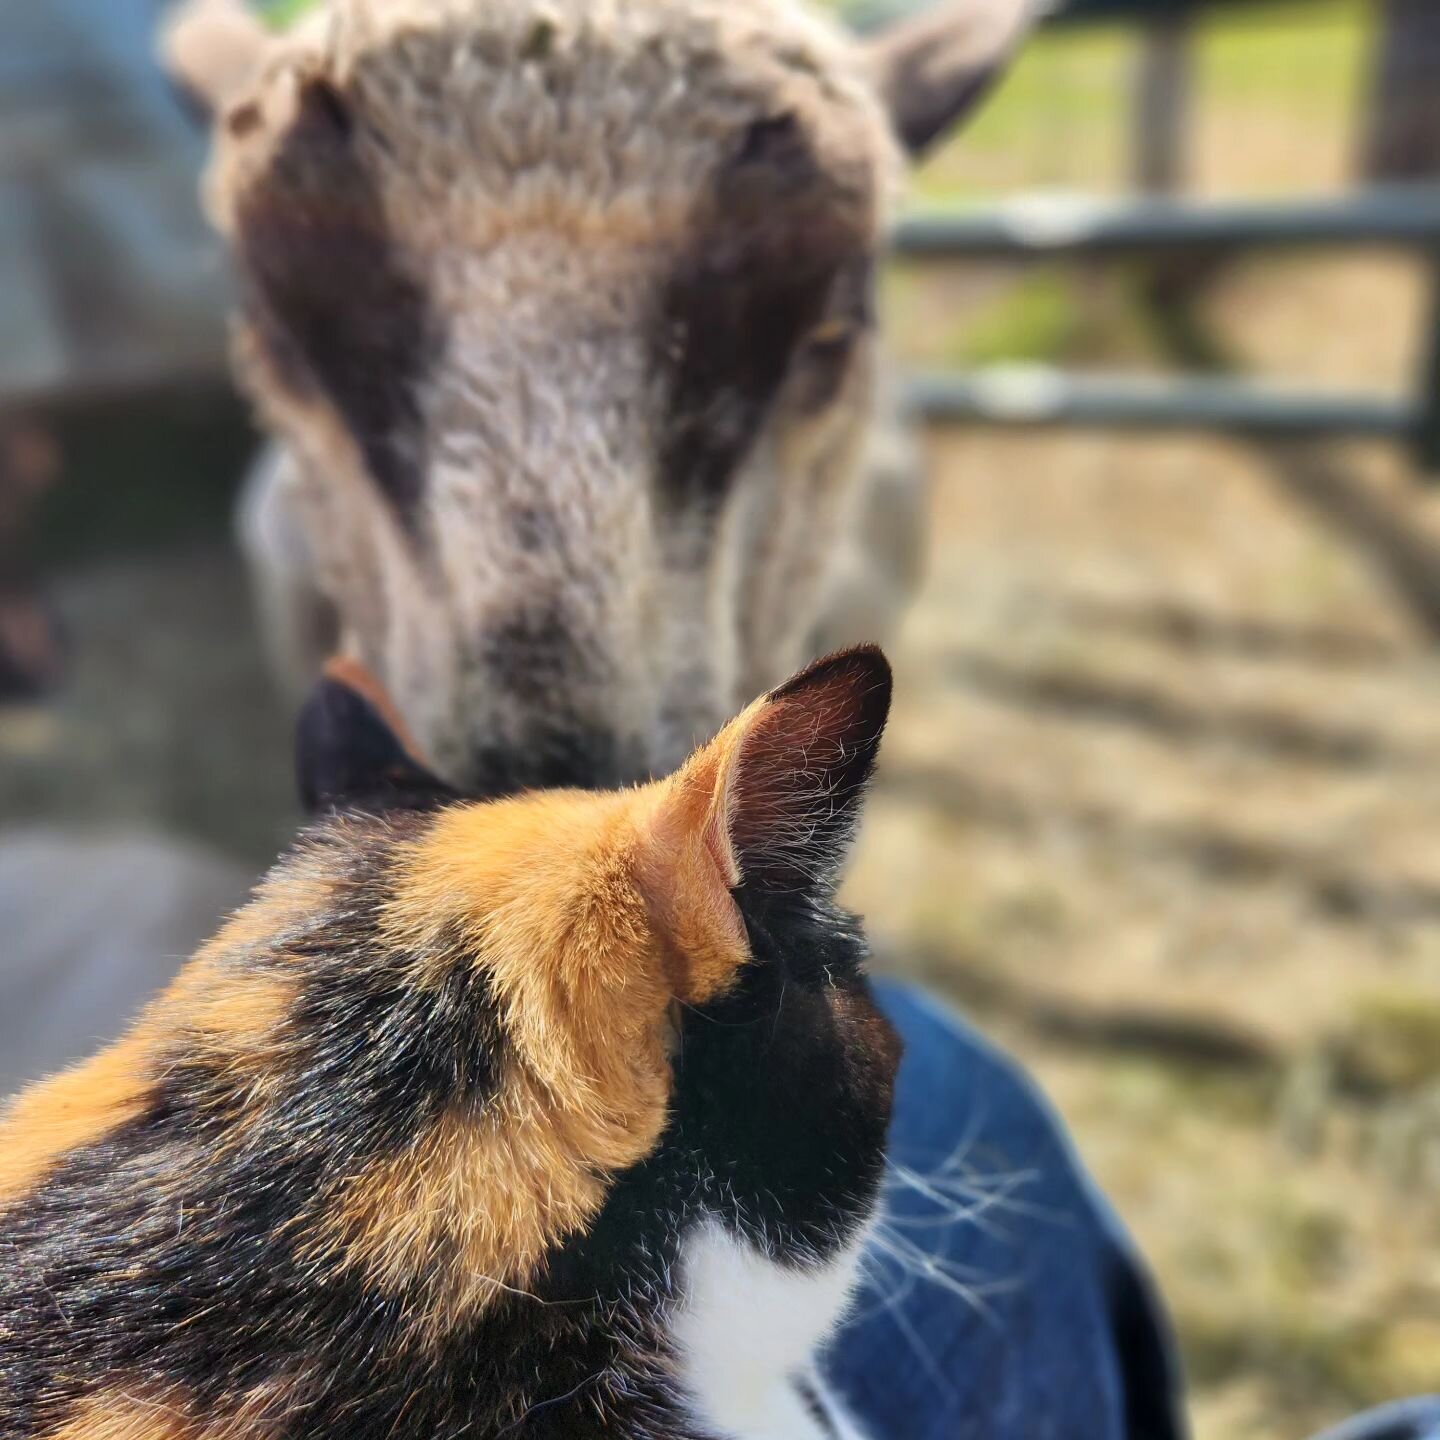 Kitties and sheep share a connection. Sitting in the pasture with Gigi &amp; the flock gathered round. They love the sound and feel of purrs and will stay transfixed for the longest time. Peaceful.💕